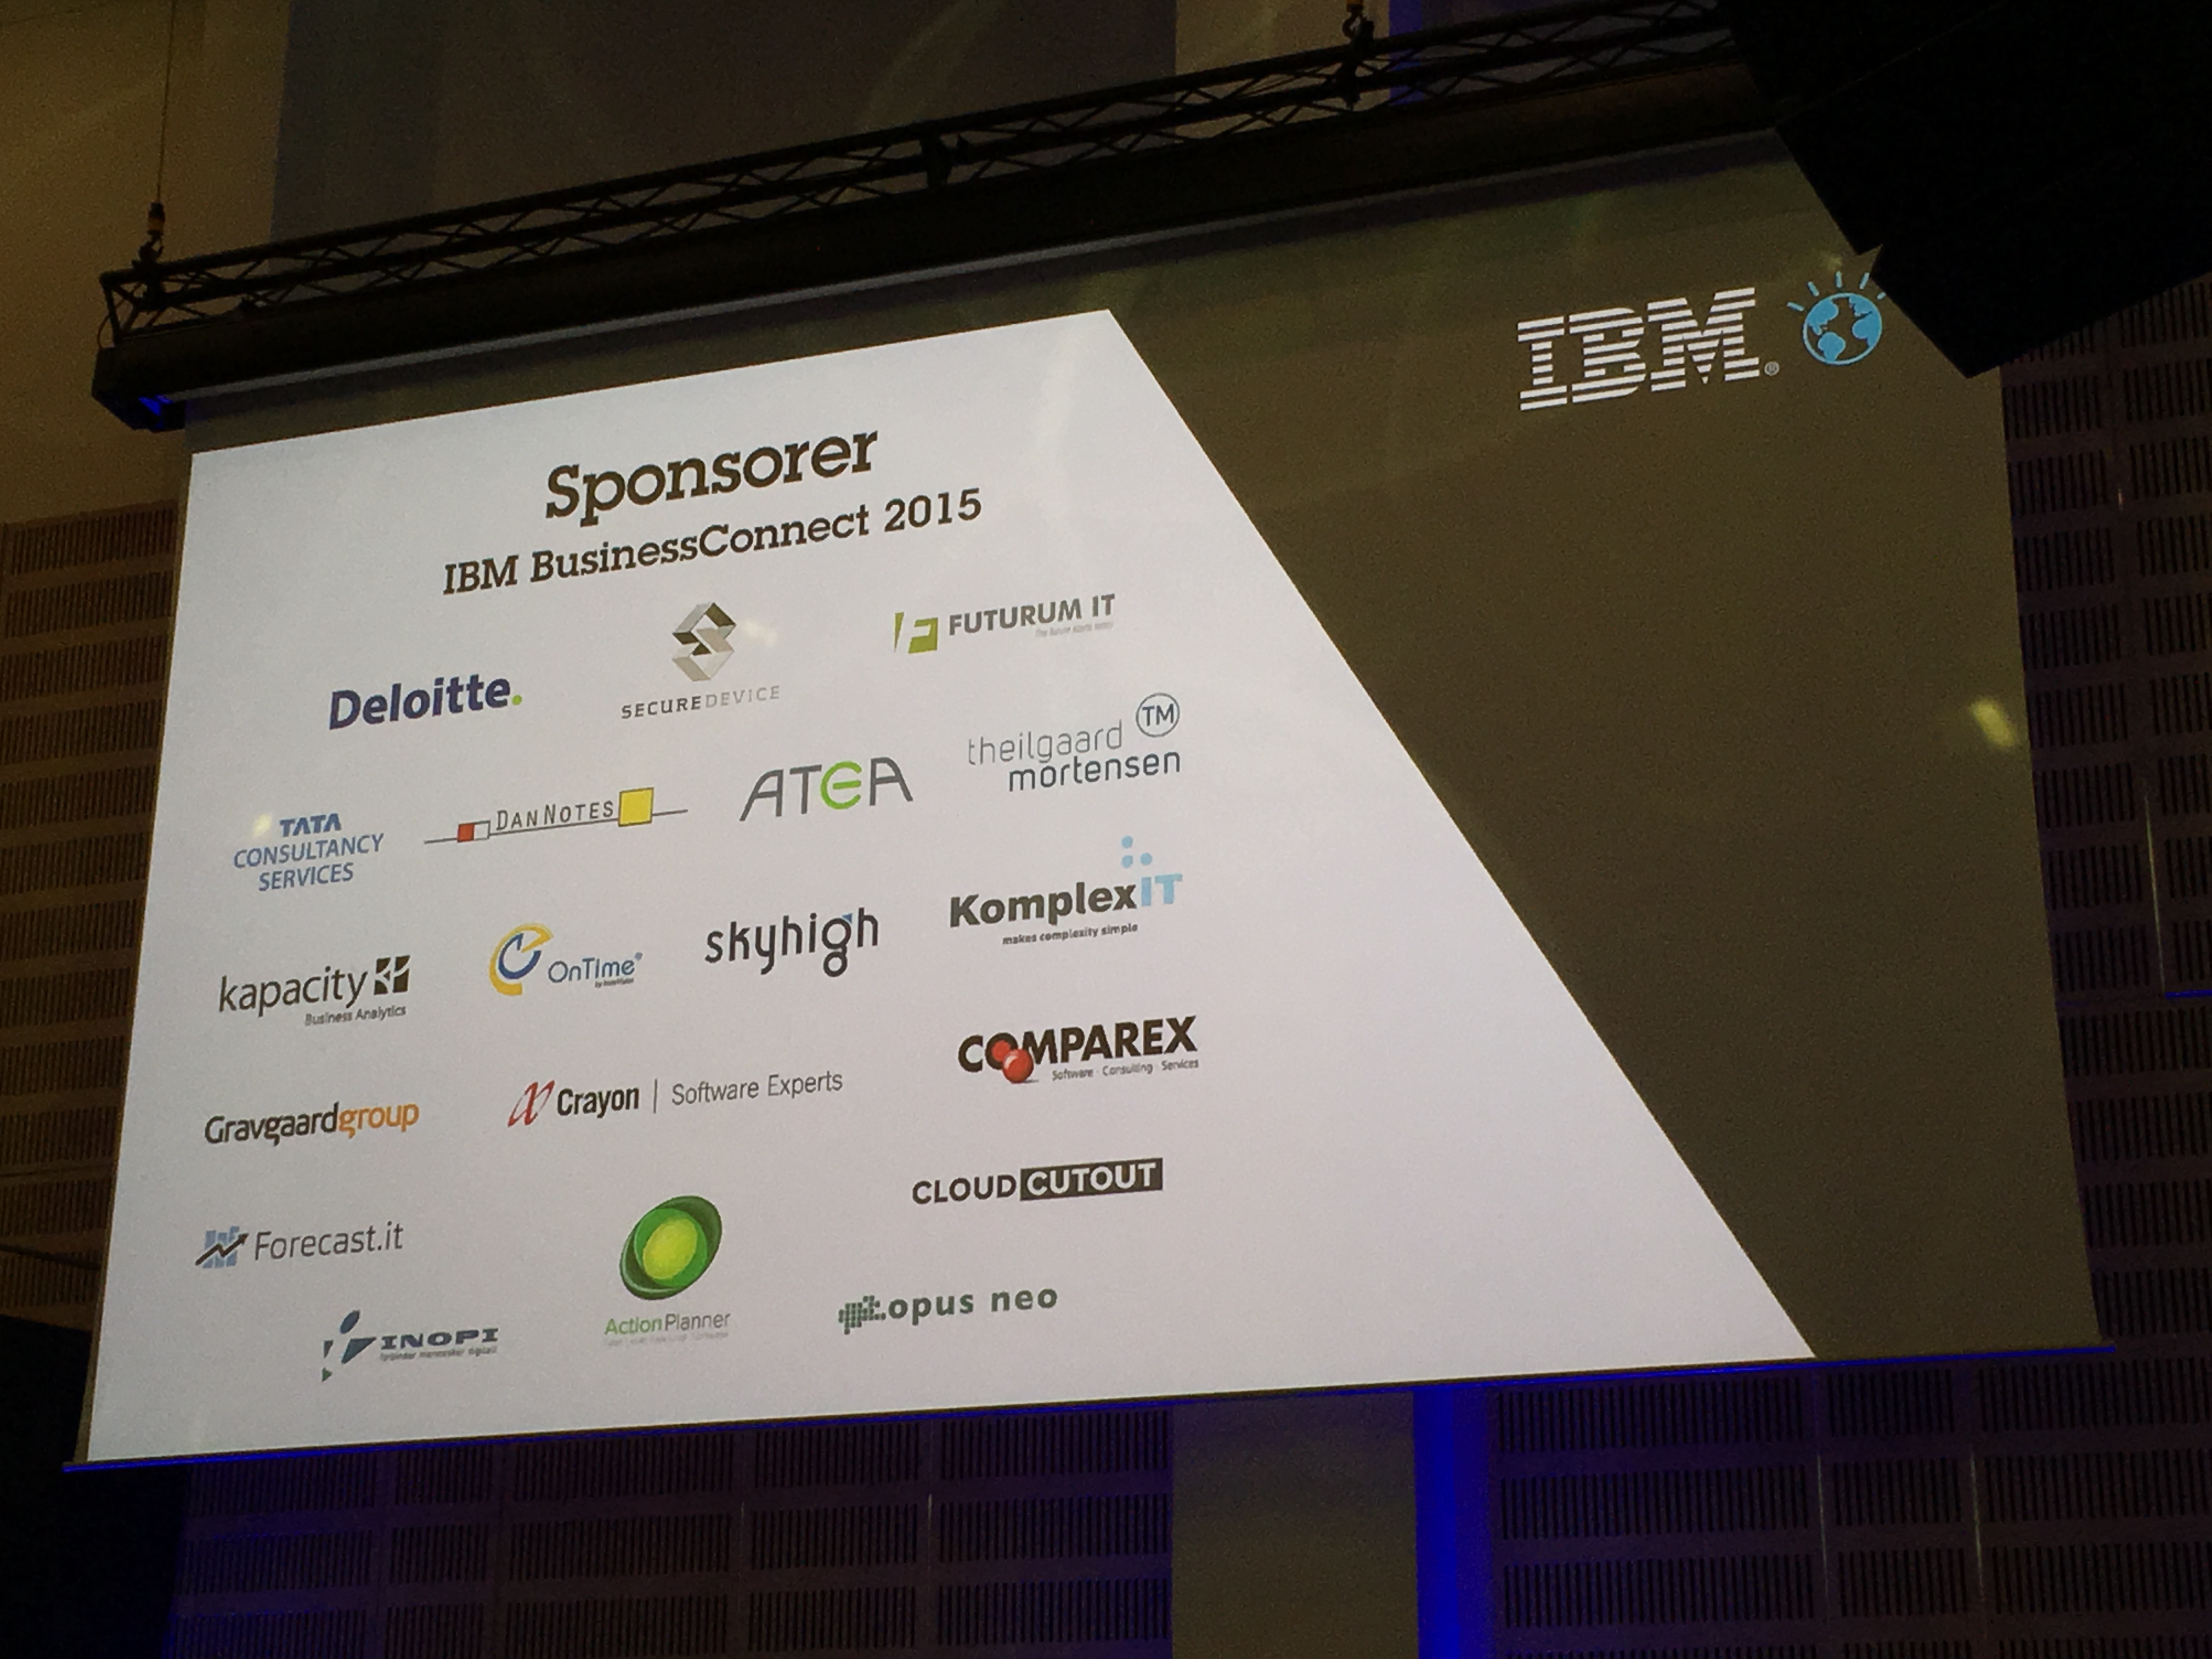 IBM Business Connect 2015